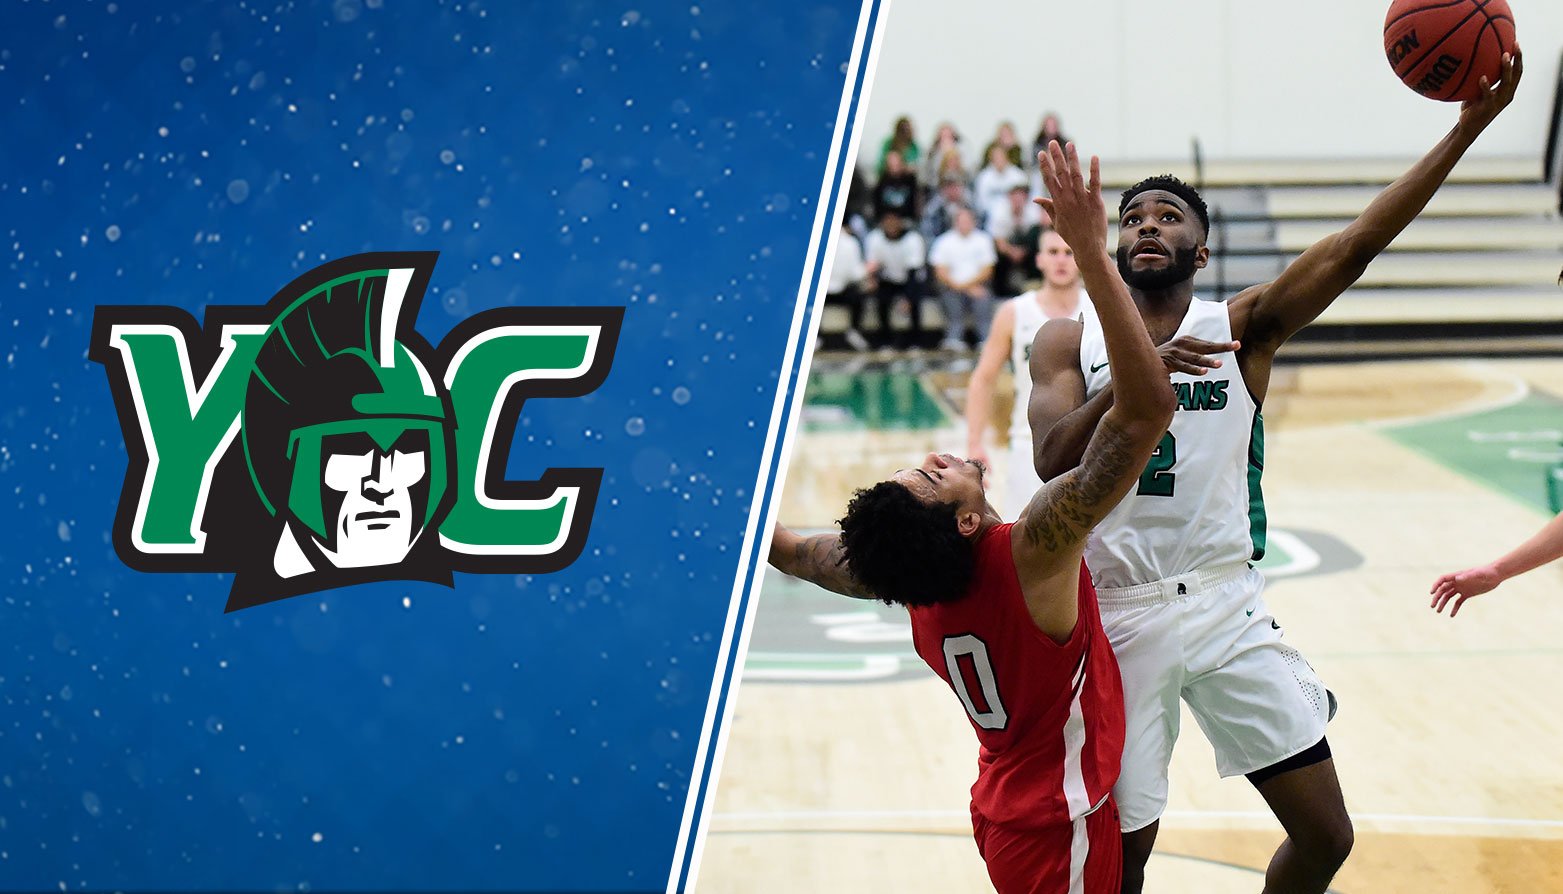 York's Jason Bady Collects Second Consecutive CAC Men's Basketball Player of the Week Award